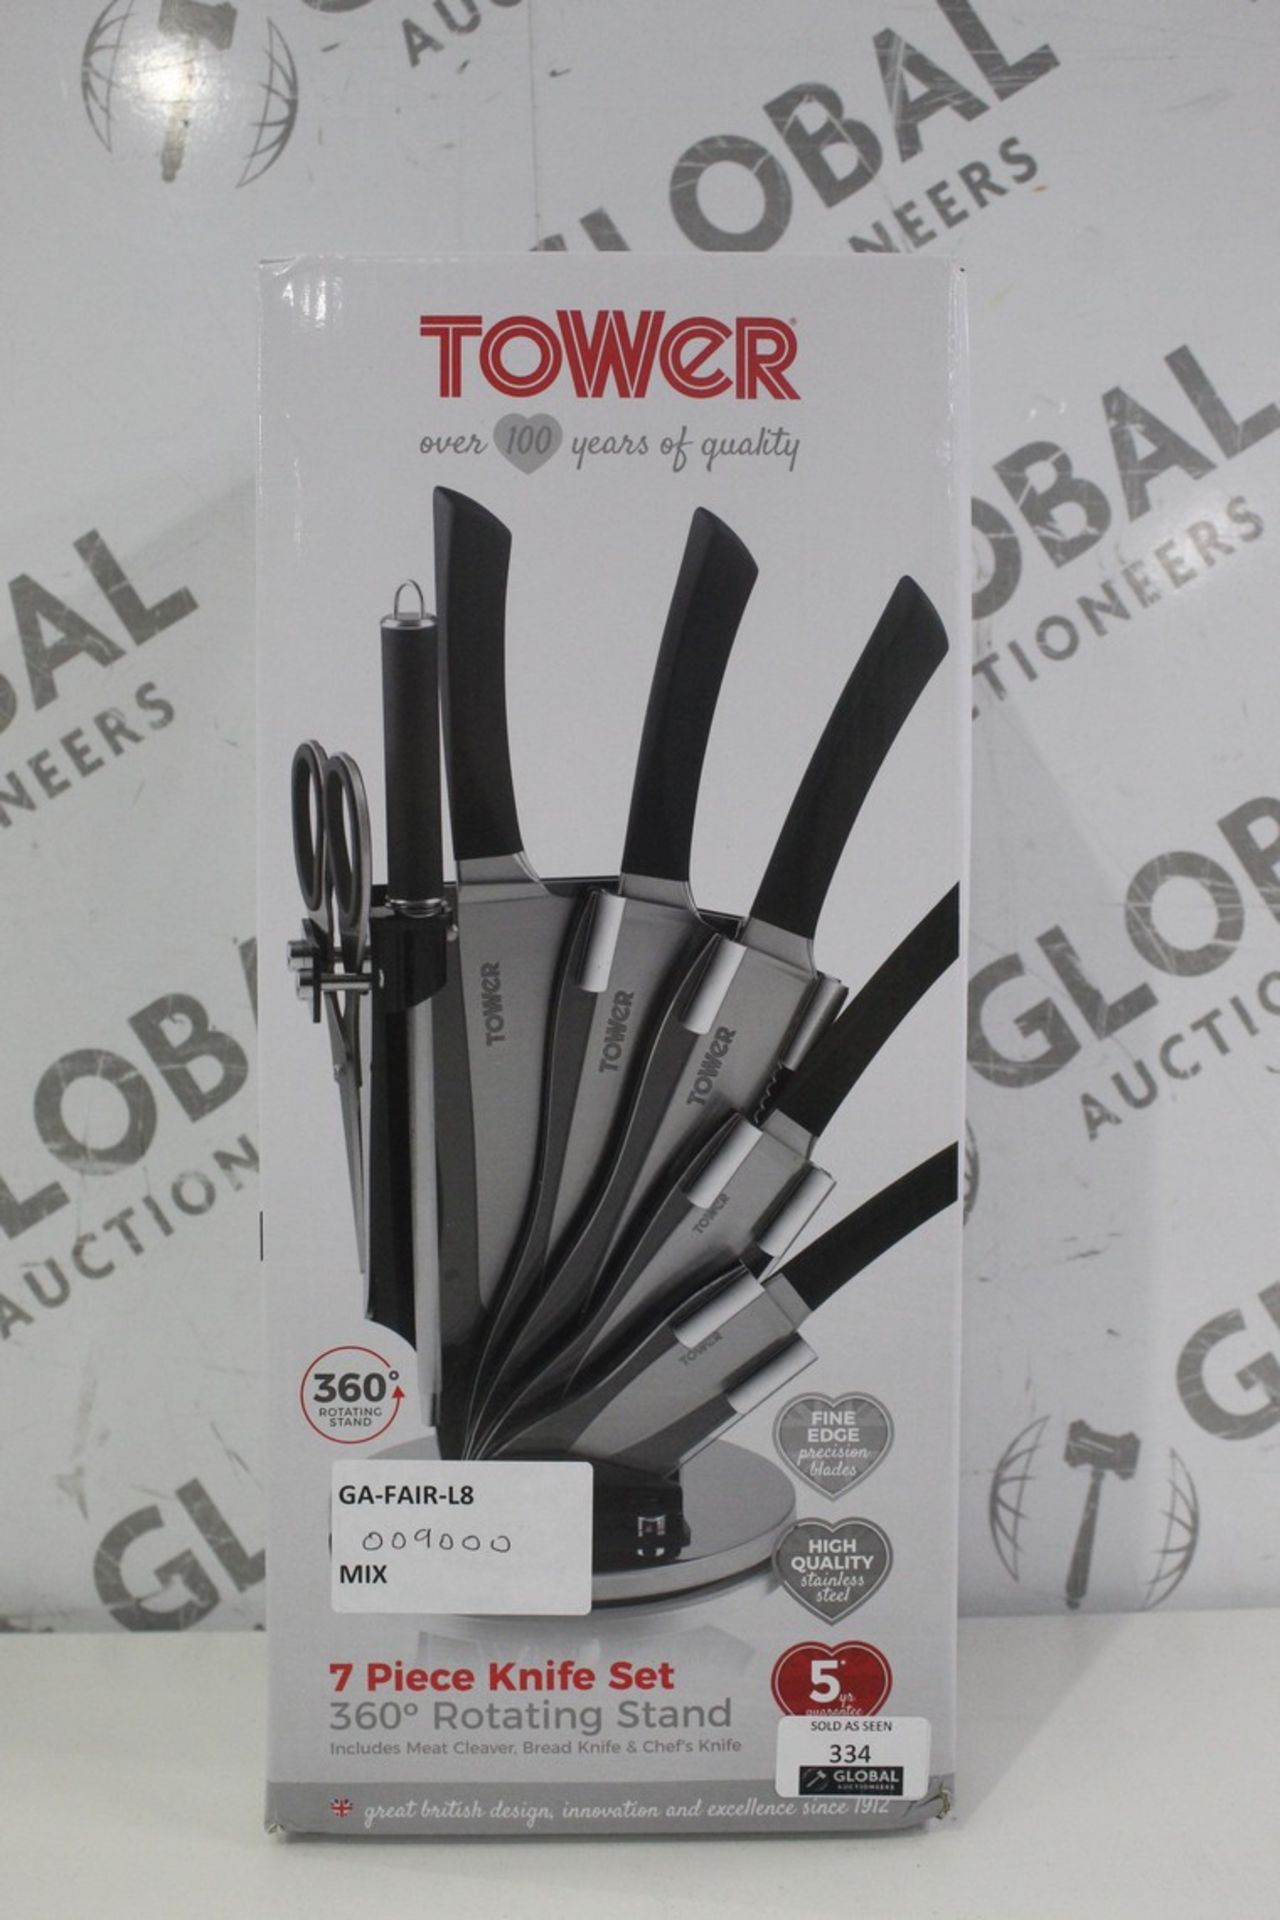 Boxed Tower 7 Piece Knife Set Rotating Stand